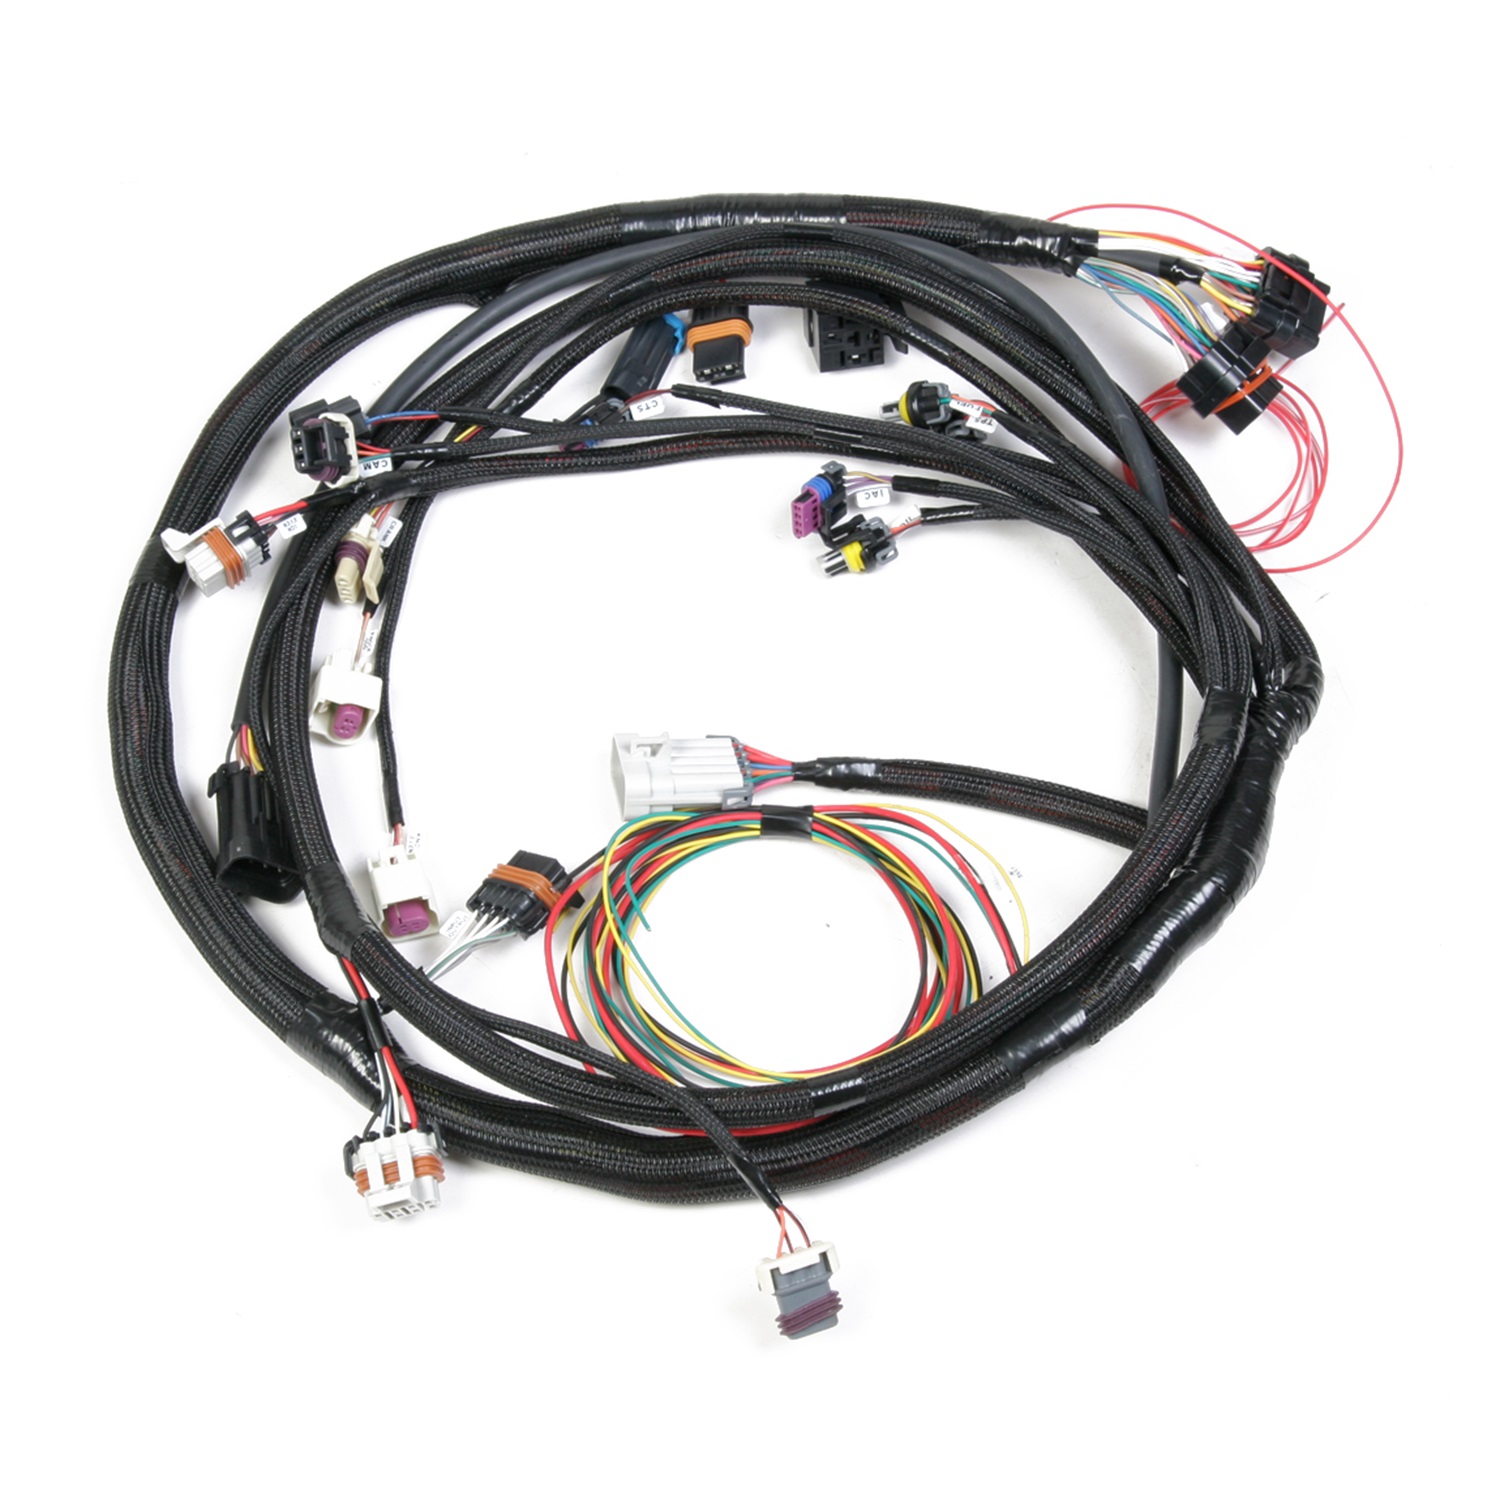 Holley Performance Holley Performance 558-102 LS1 Main Harness